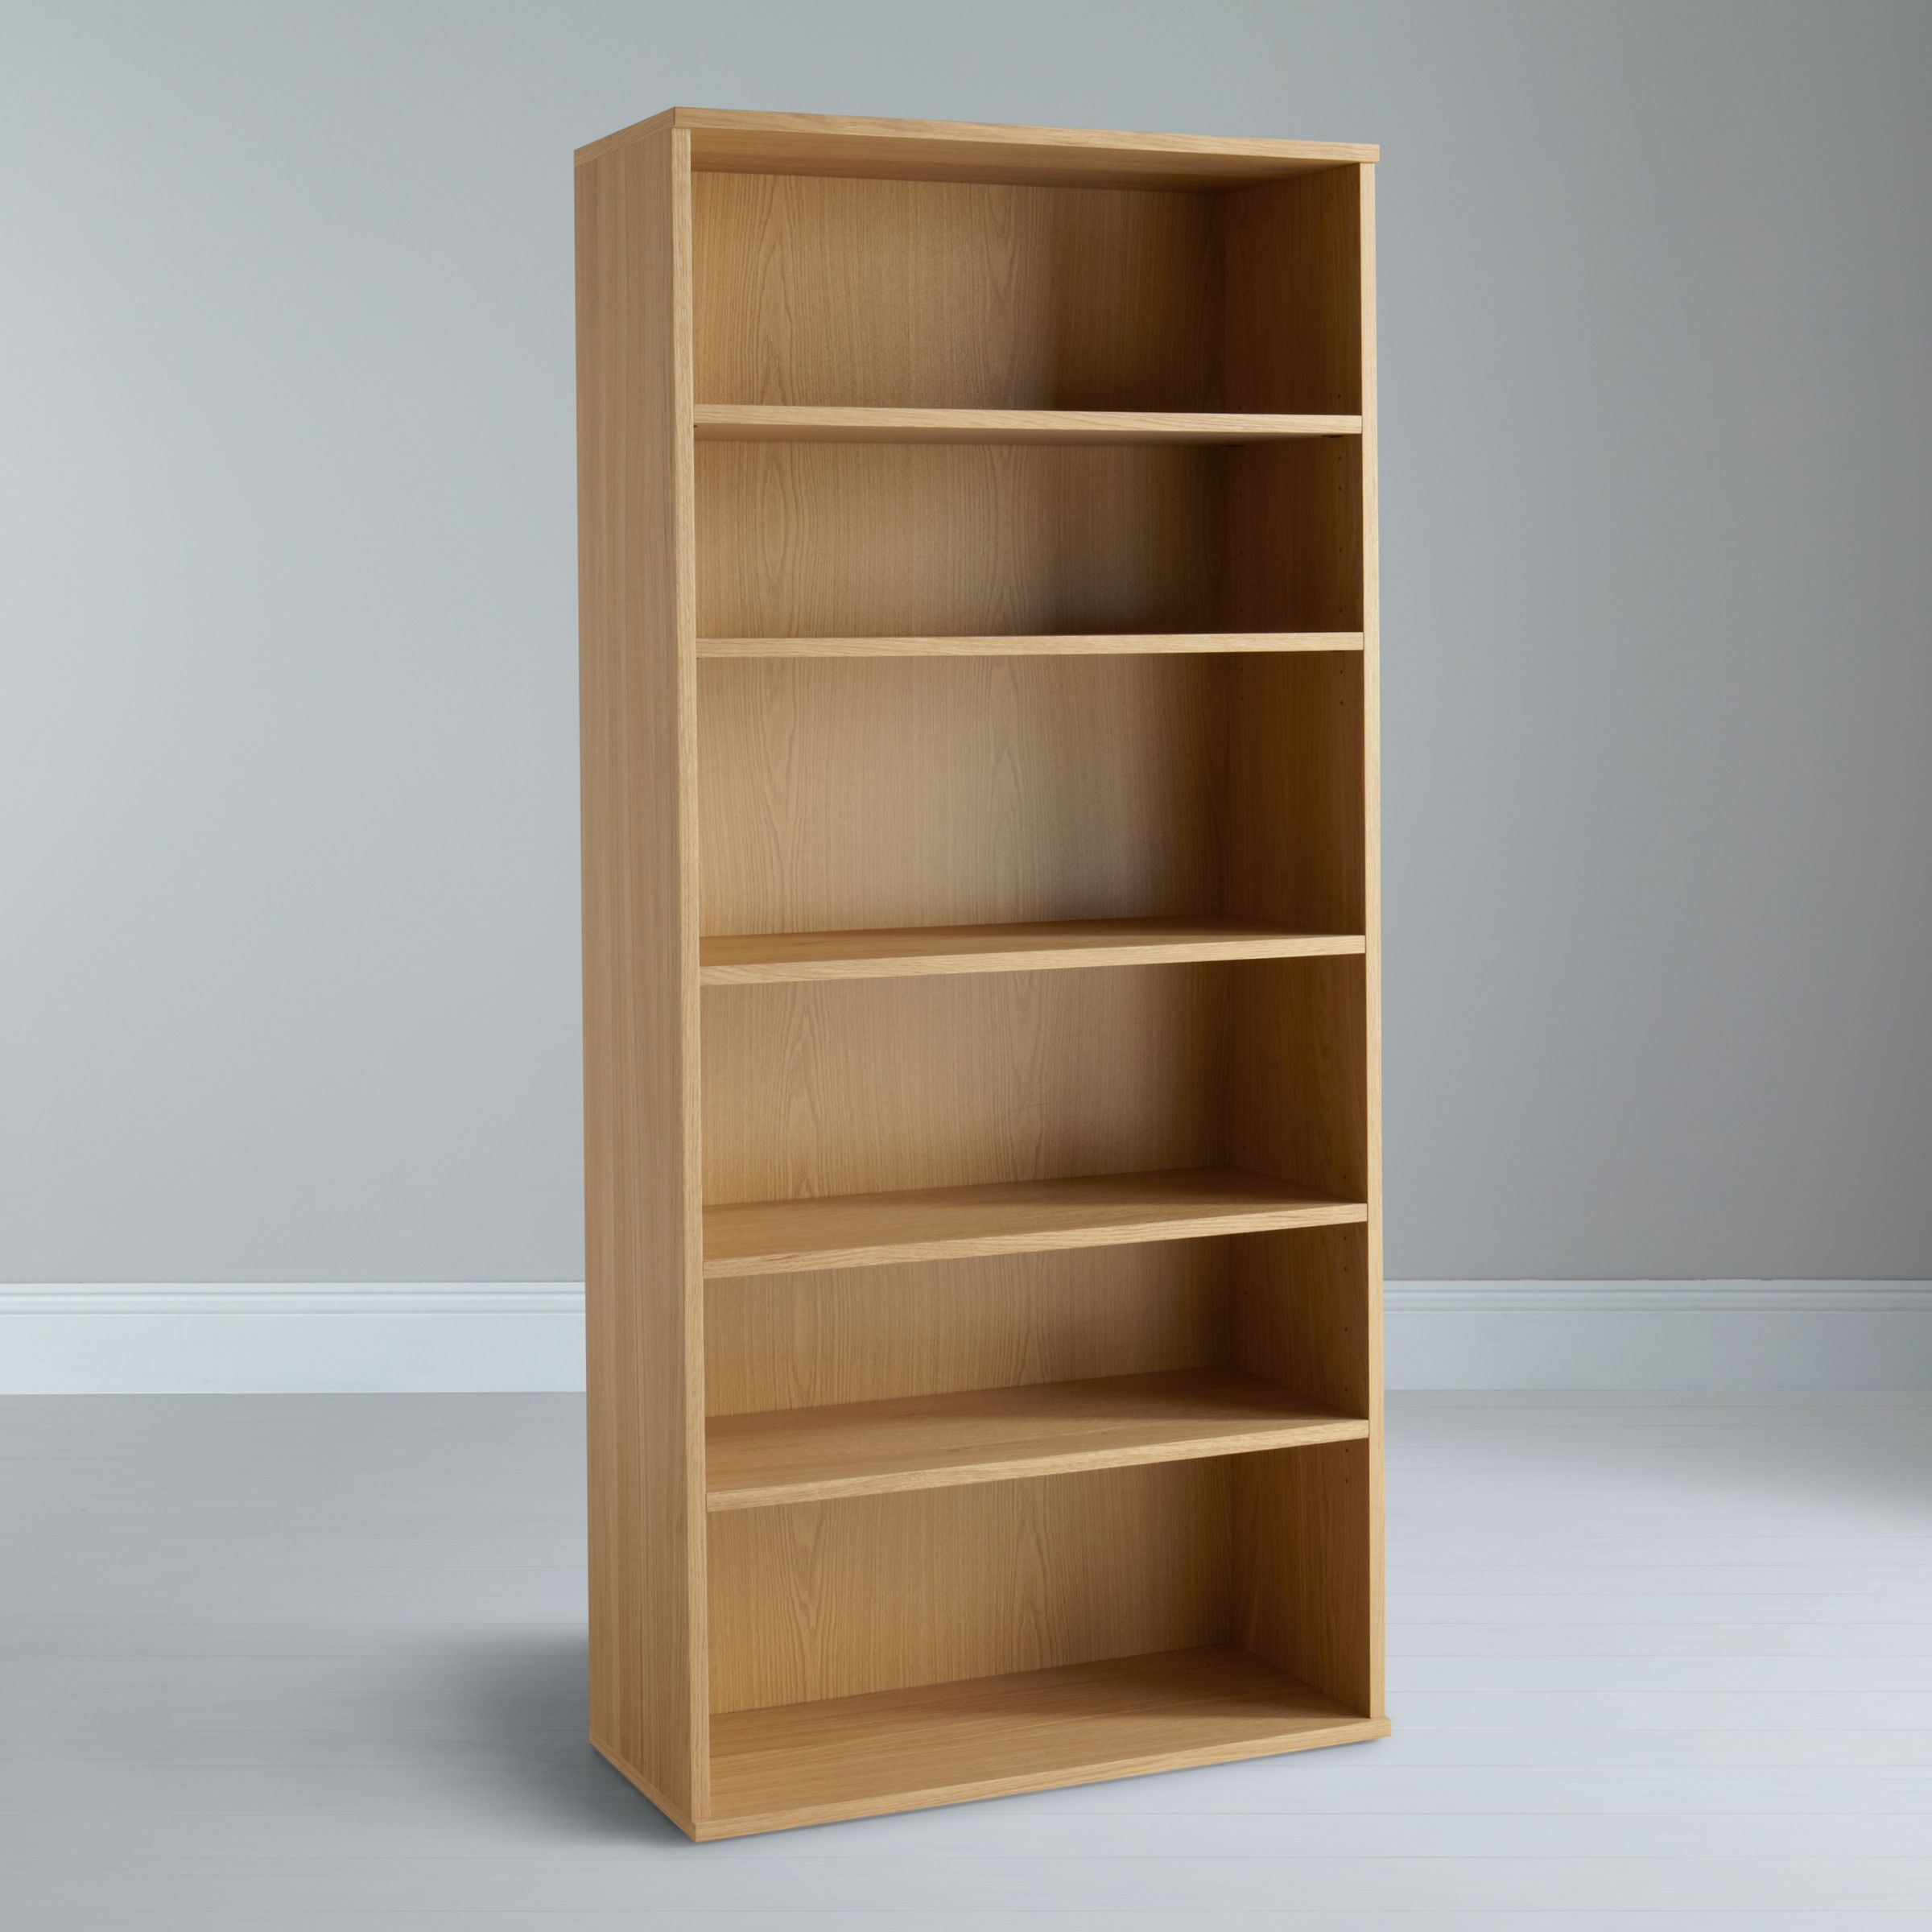 John Lewis Partners Abacus 5 Shelf Bookcase Fsc Certified At